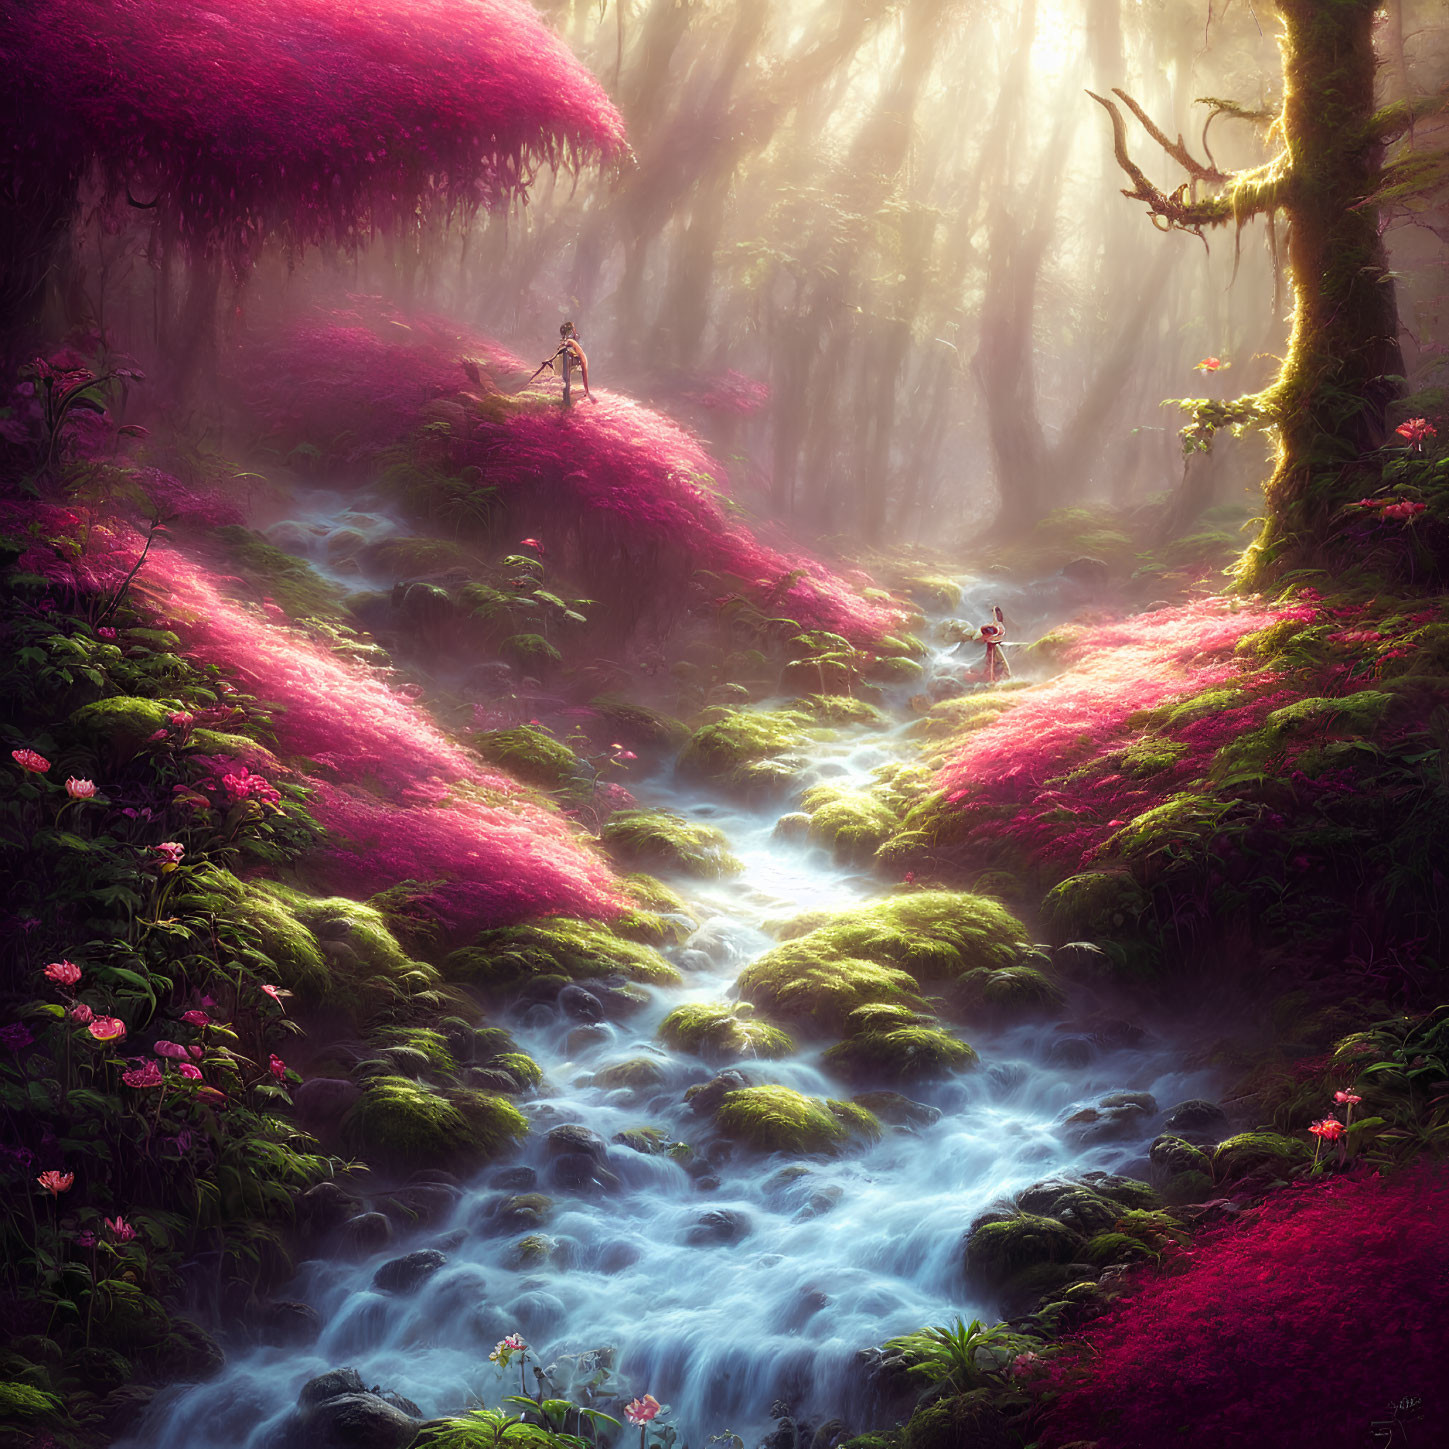 Two individuals in mystical forest with meandering stream and lush moss under sunlight.